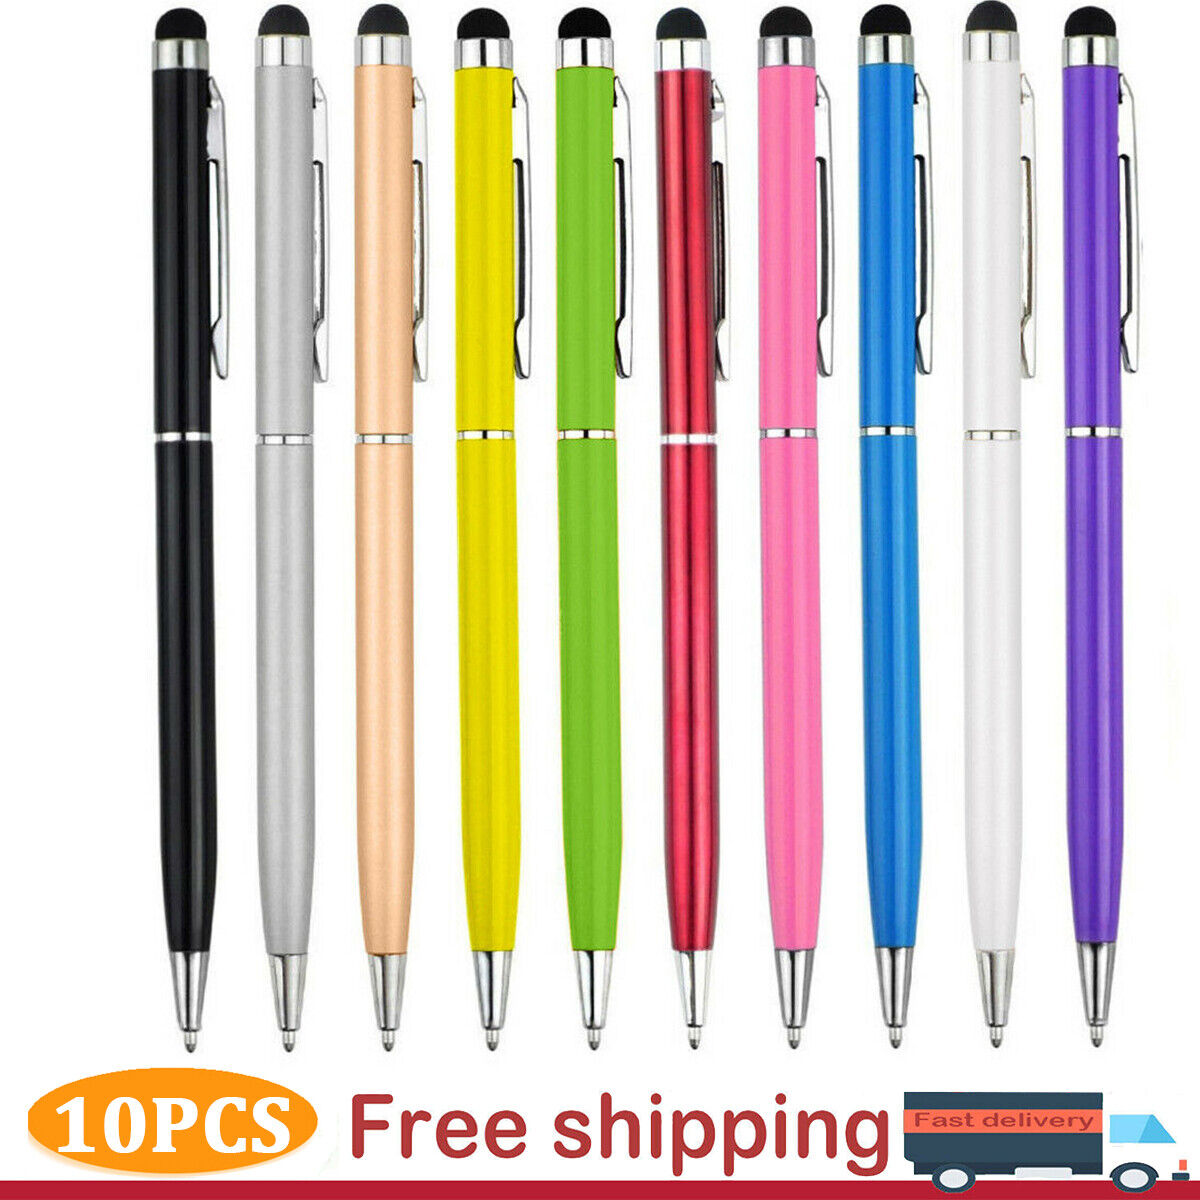 10x 2in1 Touch Screen Pen Stylus Universal For iPhone iPad Samsung Tablet Phone